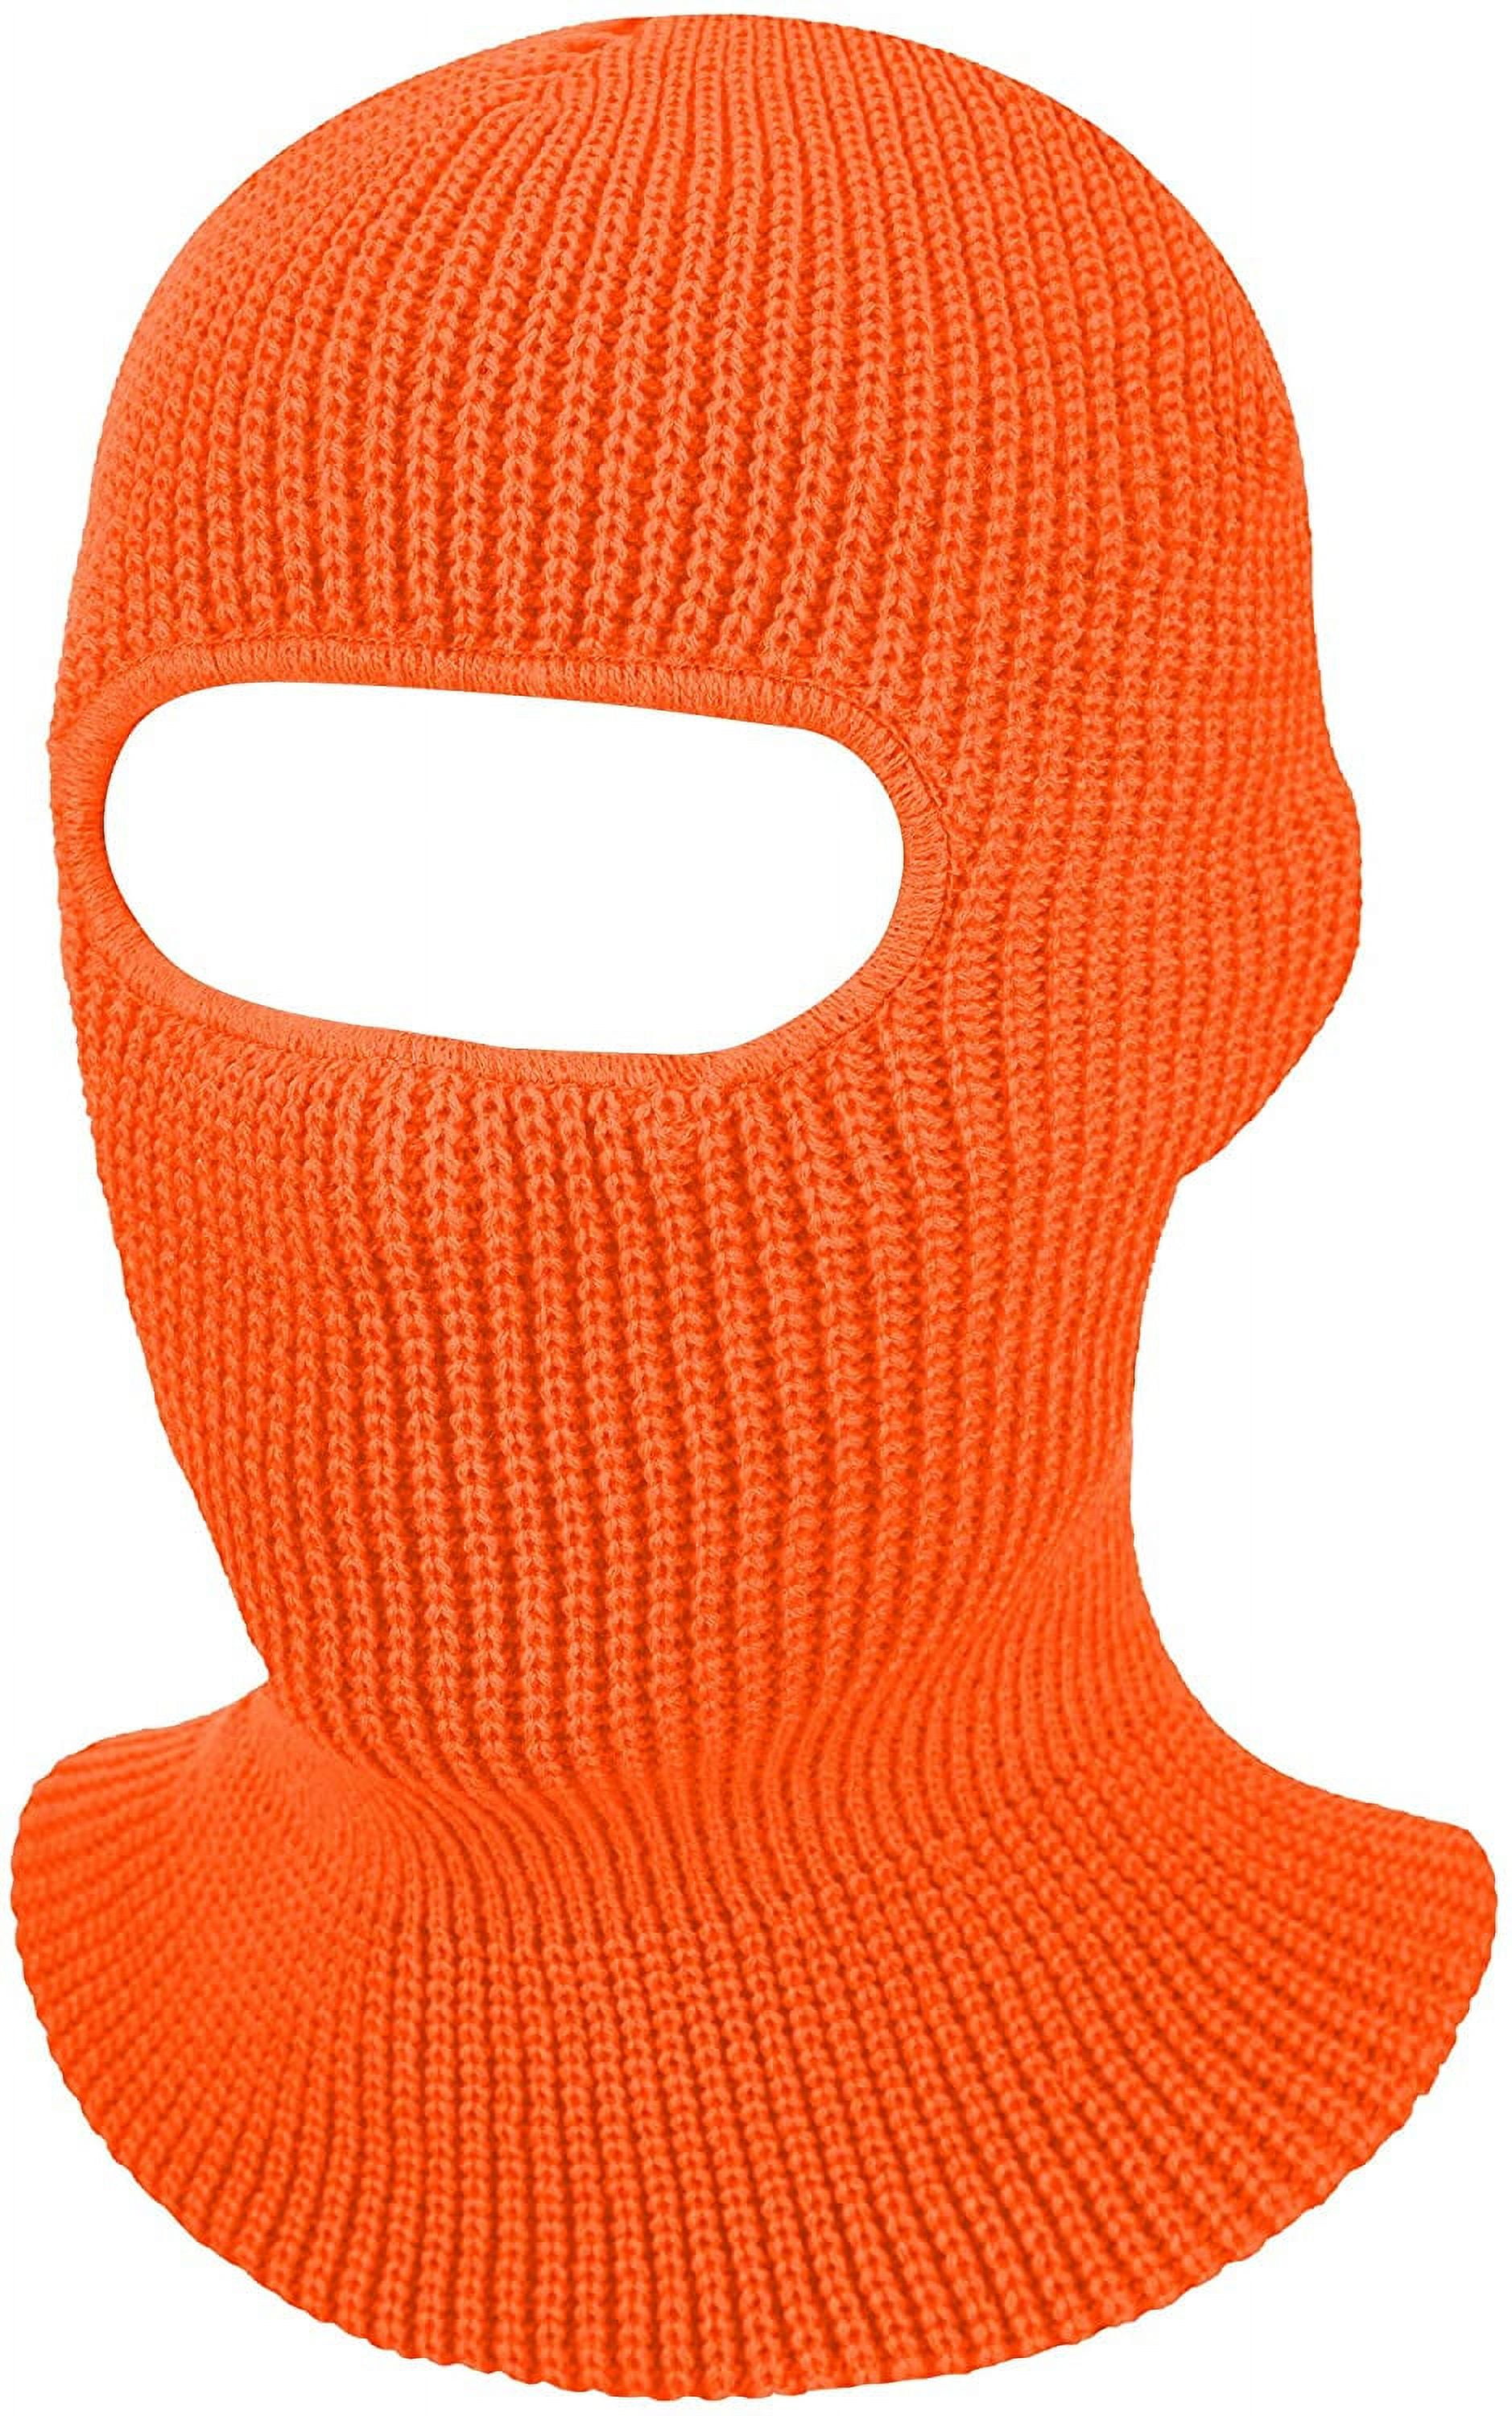 ZOELNIC 1-Hole Full Face Cover Knitted Balaclava Face Mask Unisex Adult  Winter Balaclava Warm Knit Ski Beanie Cap for Outdoor Sports, Pink